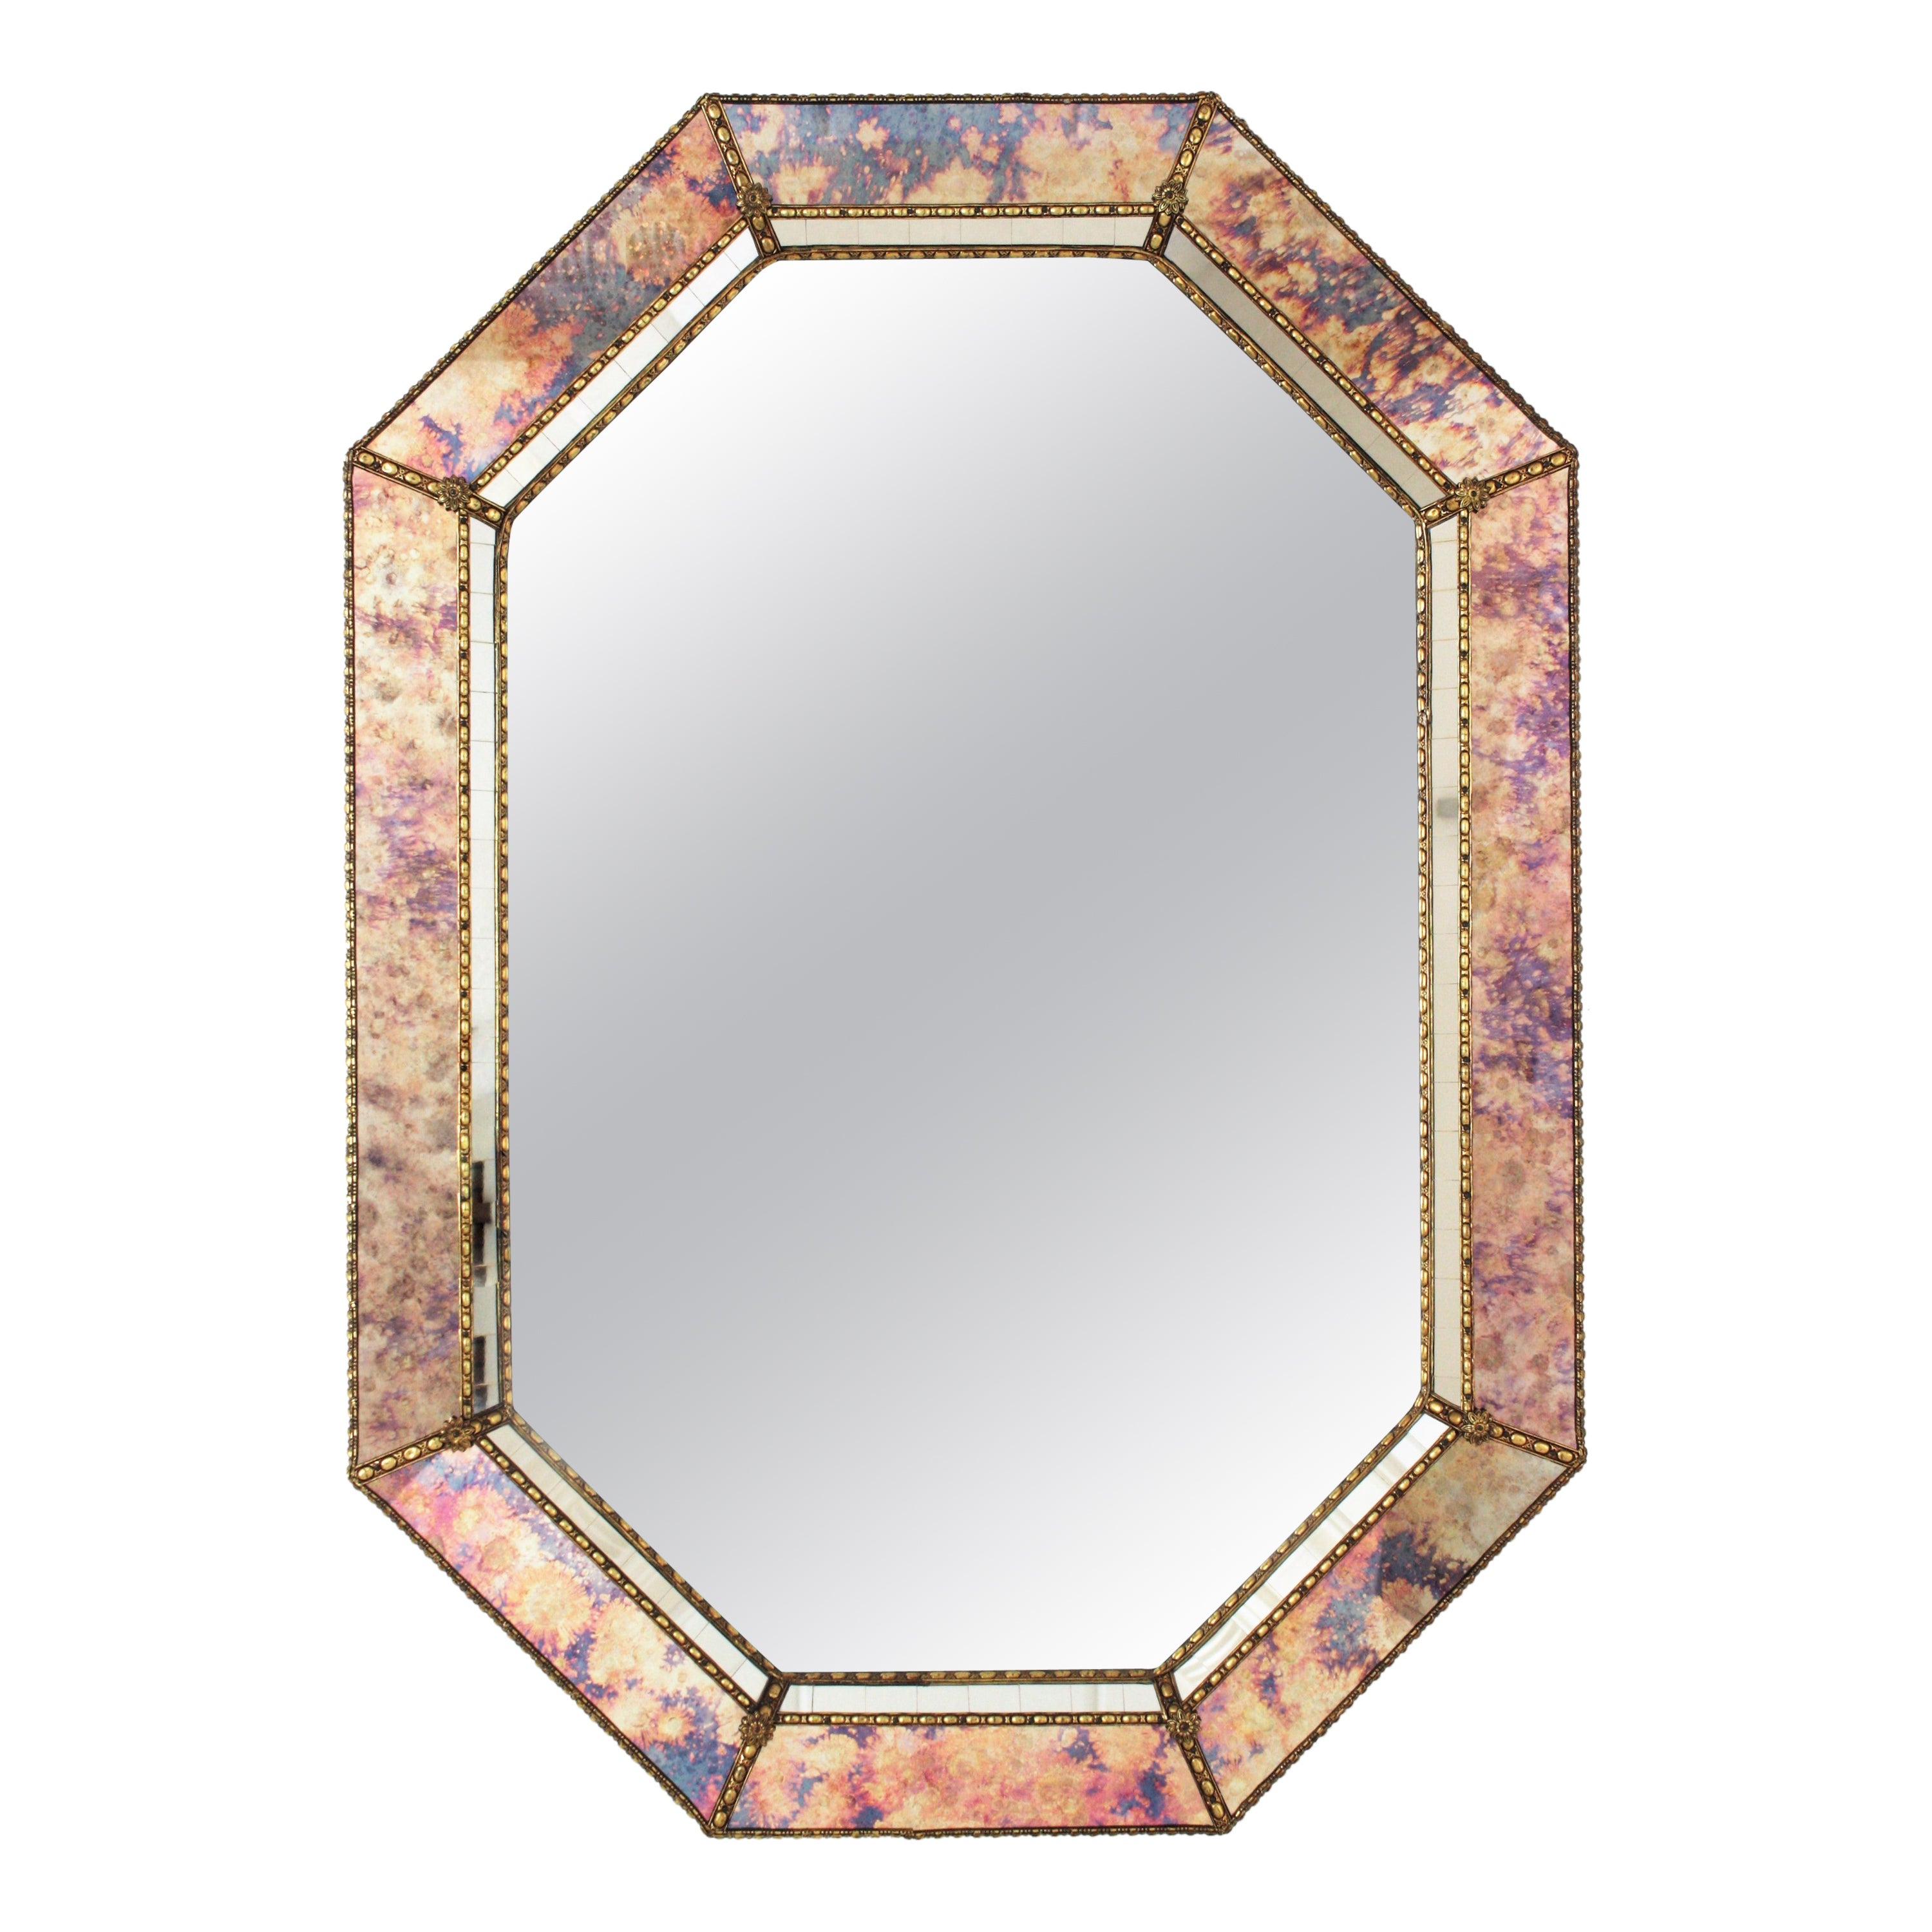 Octagonal Venetian Style Mirror with Iridiscent Pink Purple Glass & Brass Detail For Sale